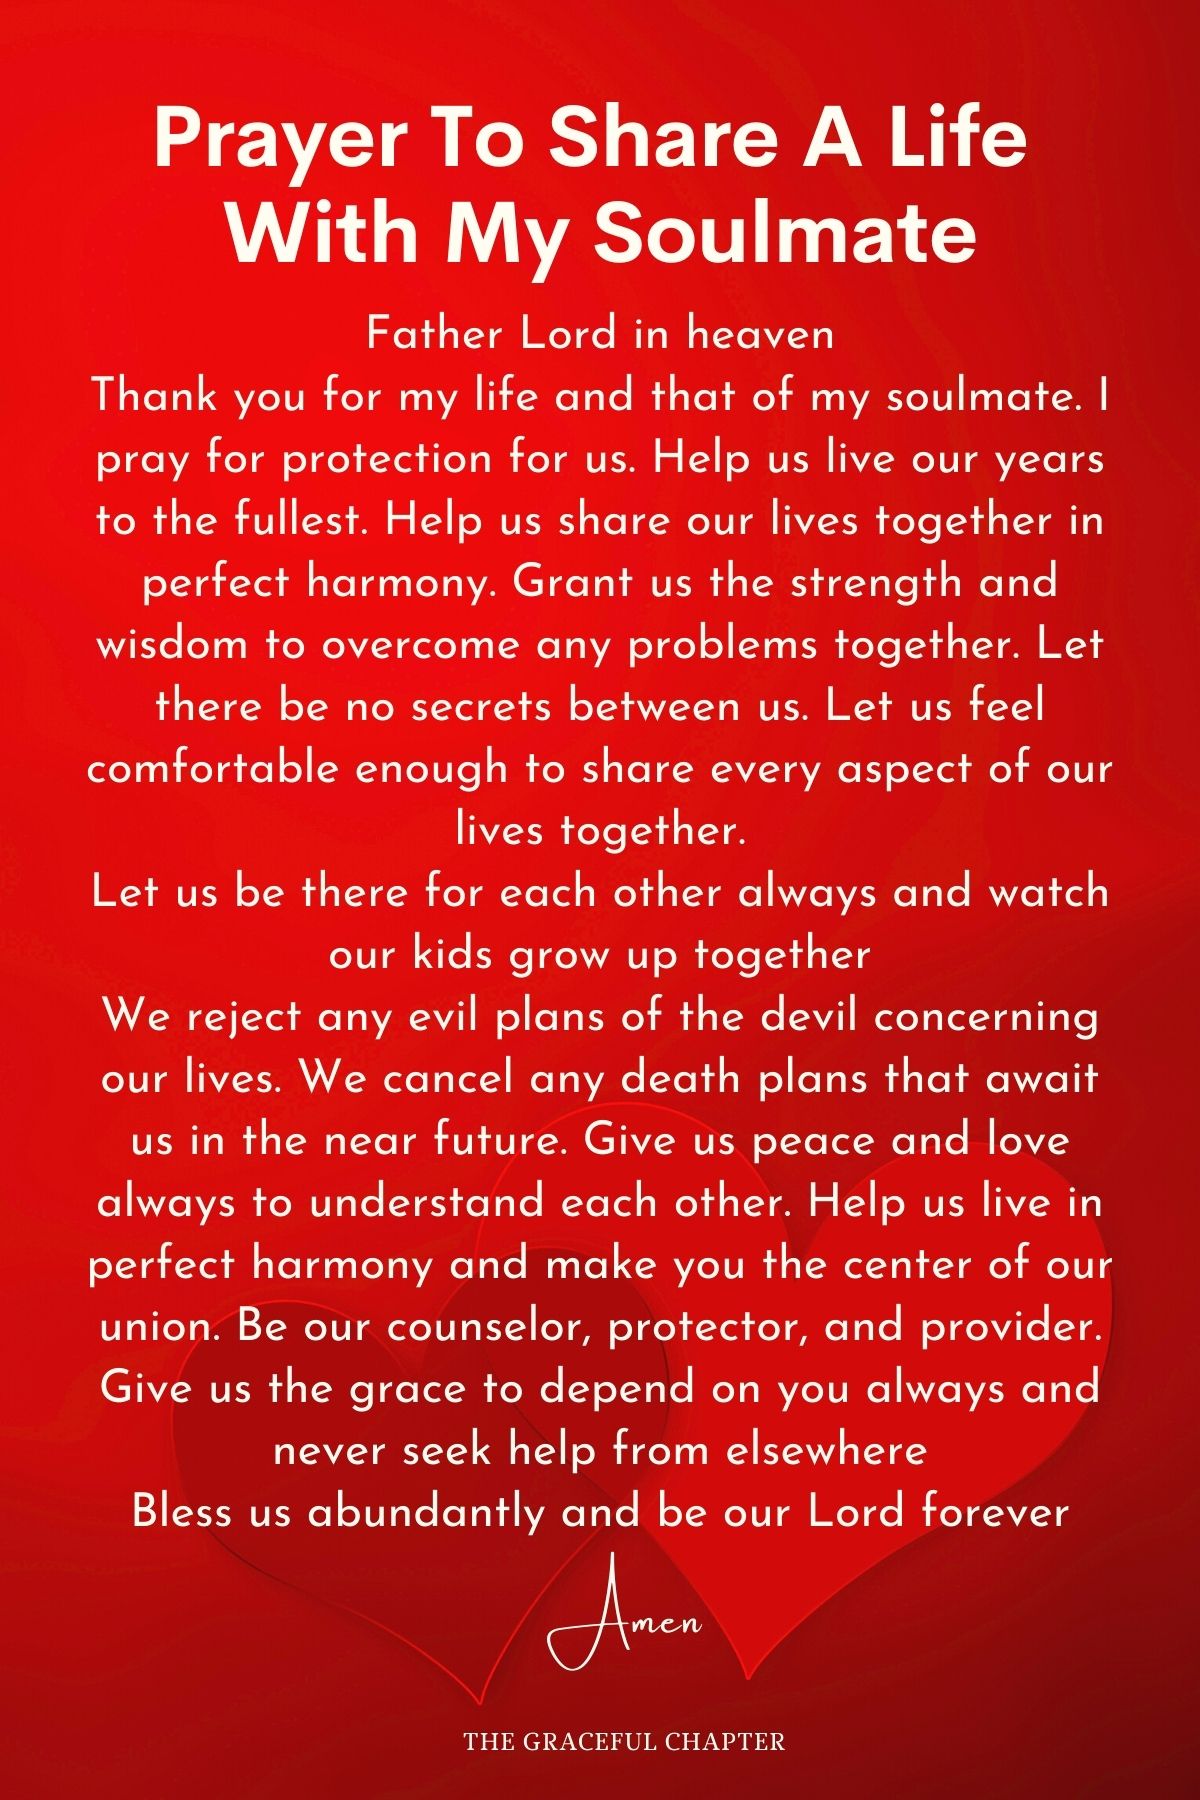 Prayer to share our lives together